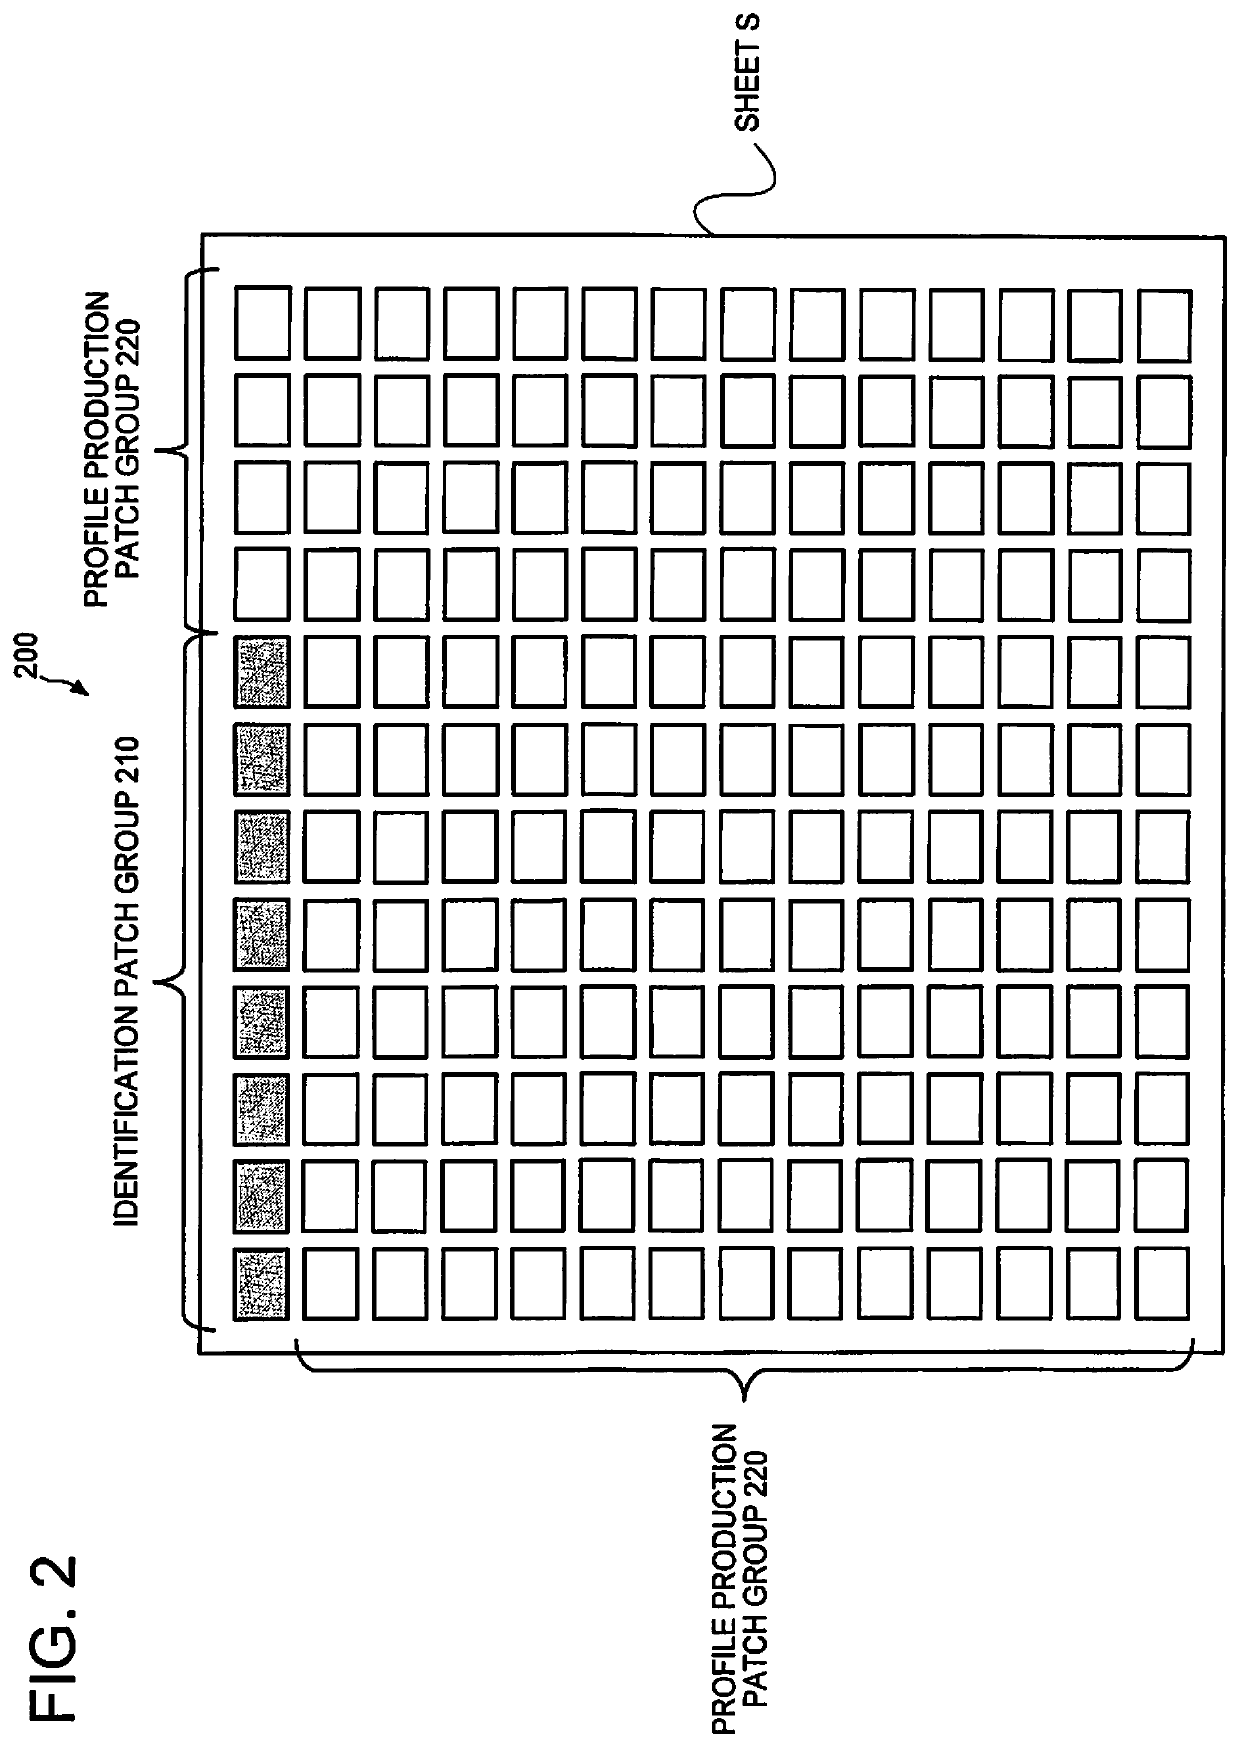 Information processing device that generates data to print color chart, information processing method for generating data to print color chart, and color chart